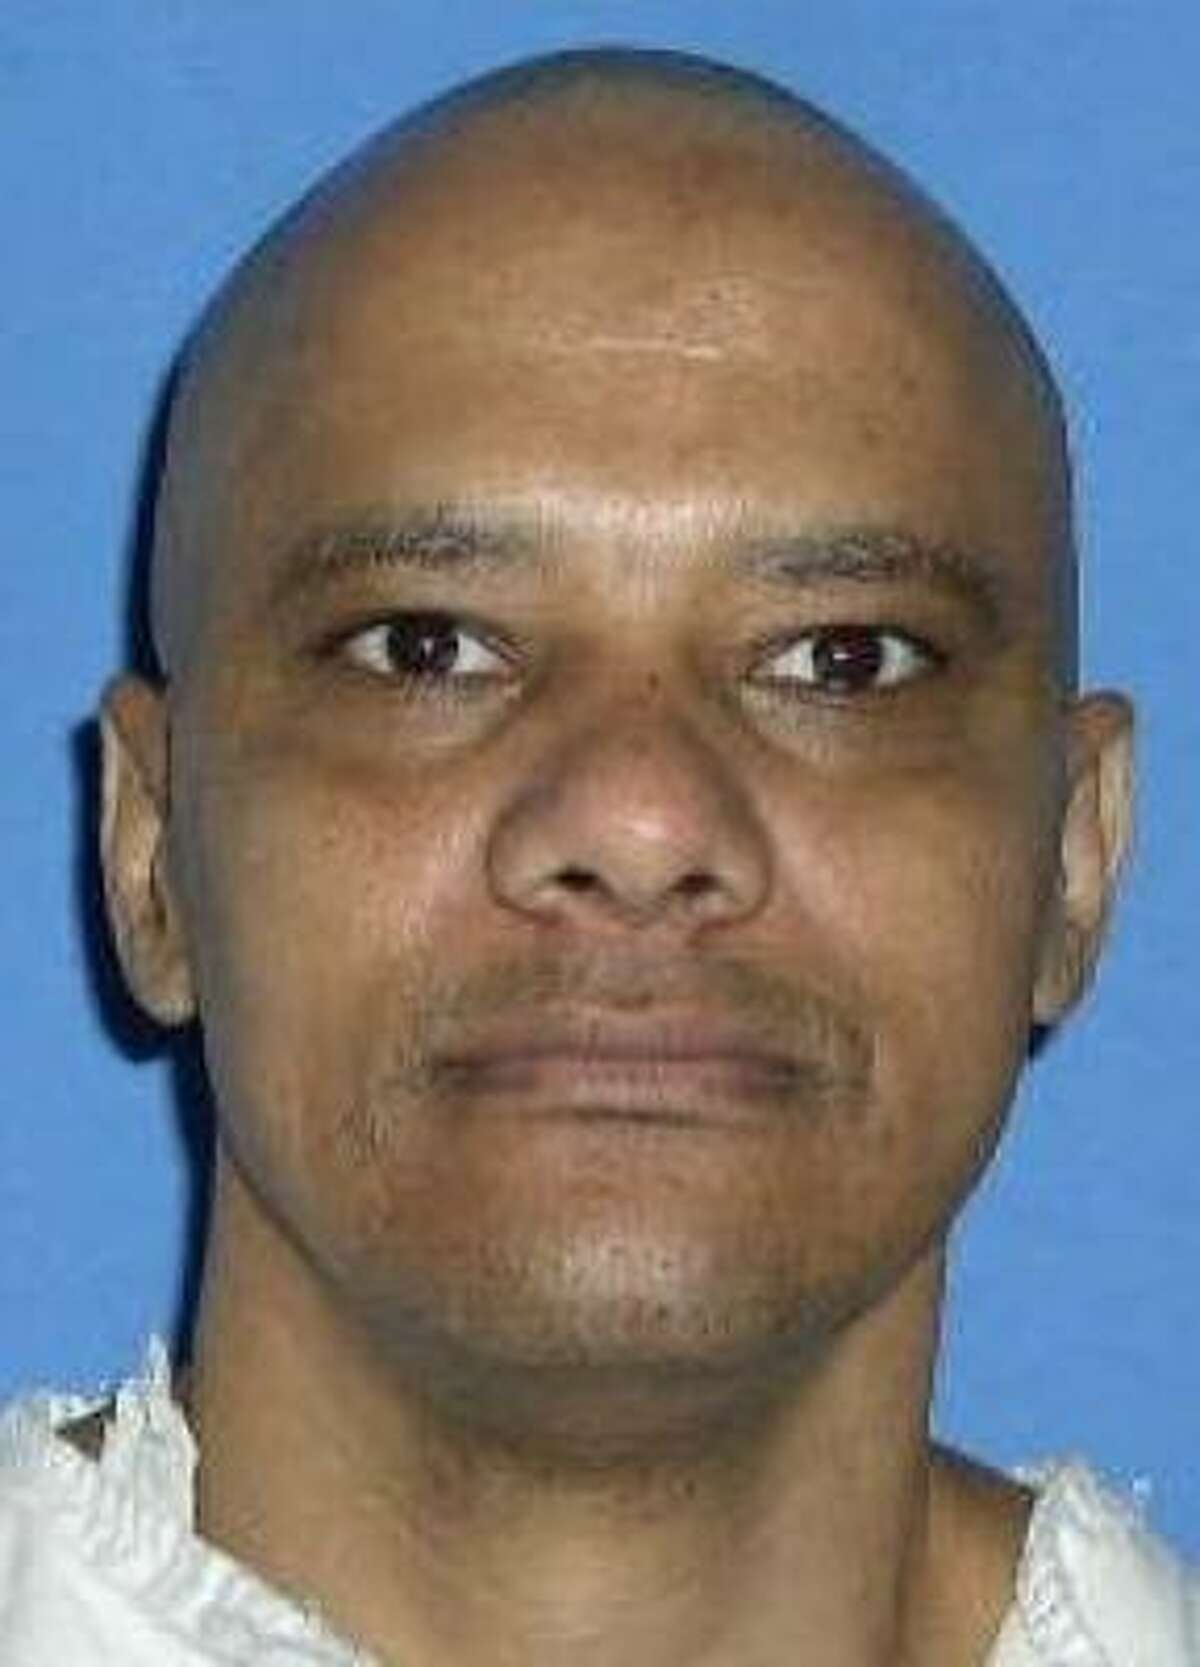 Michael Richard was executed Tuesday after the U.S. Supreme Court rejected his request for a reprieve based on a Kentucky lethal injection cruelty case.